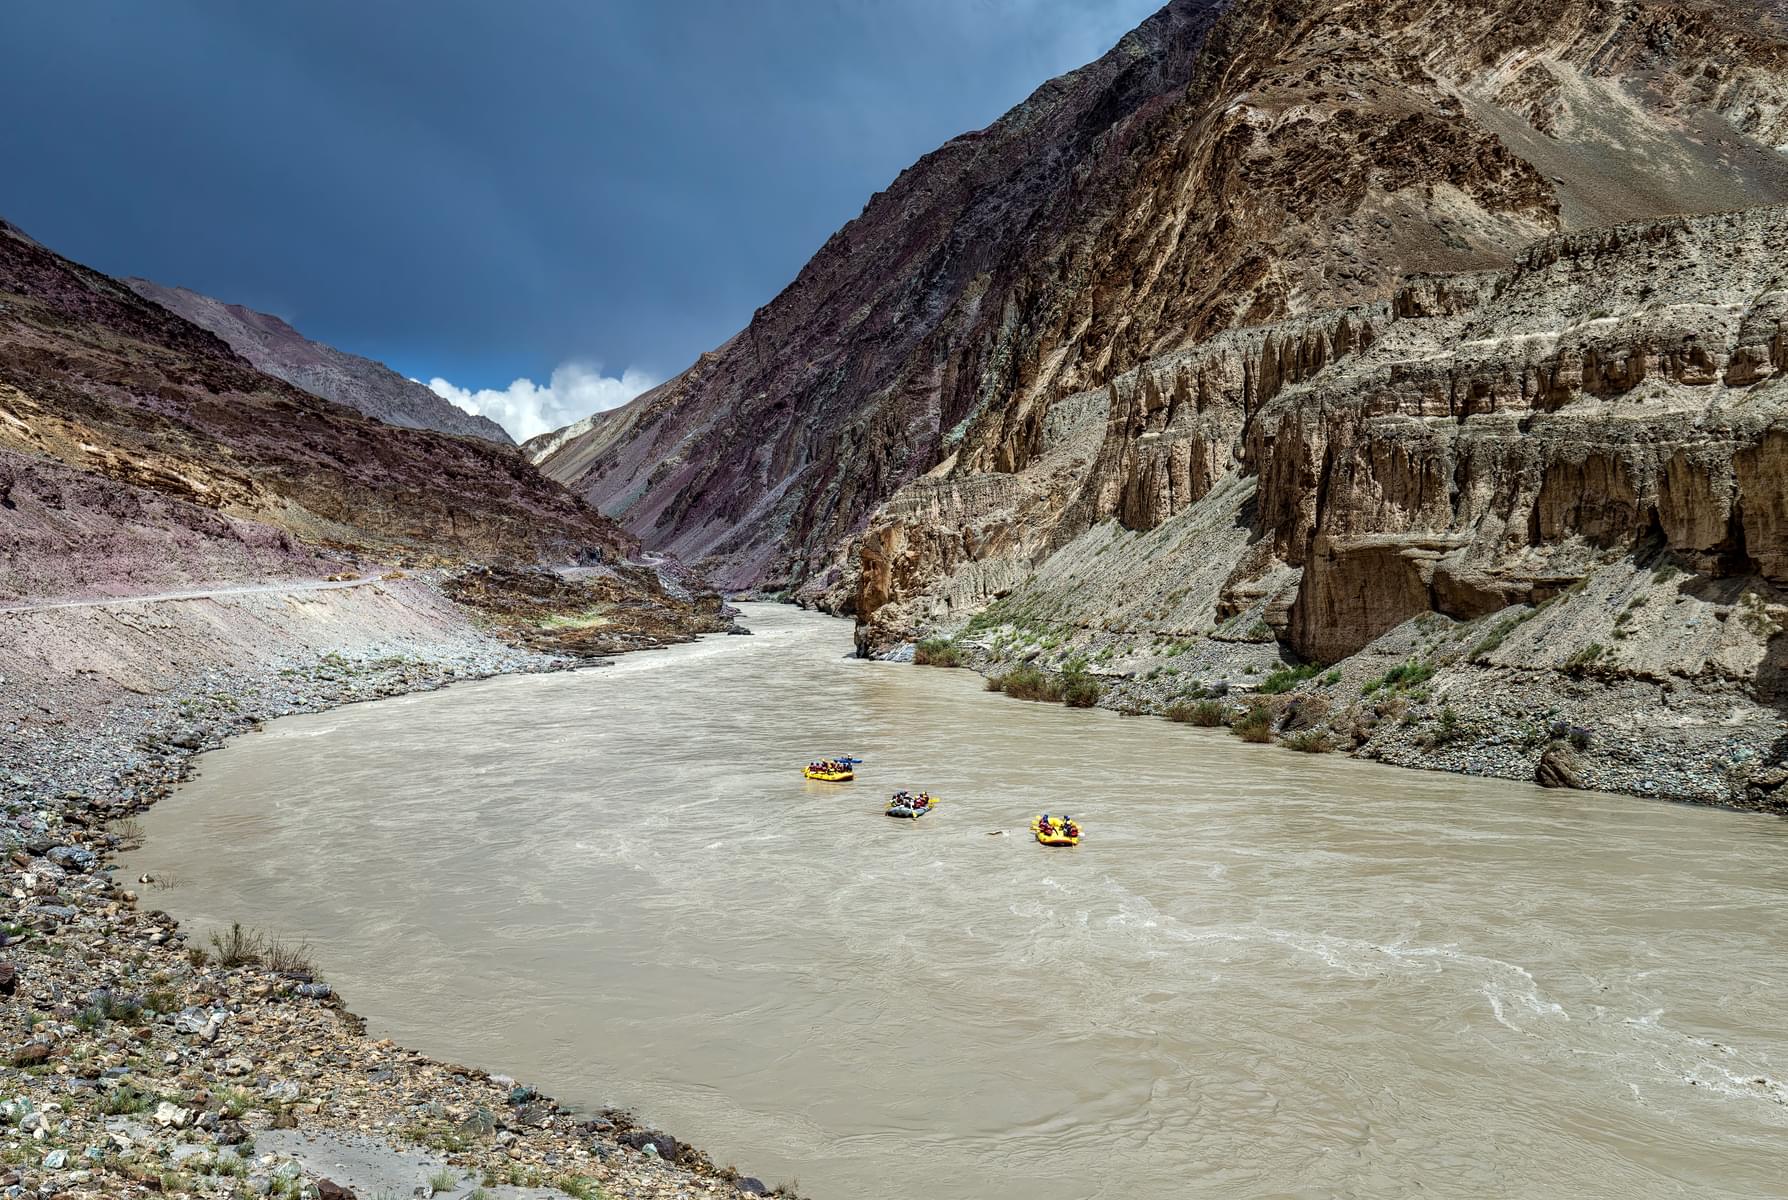 Marvel at the mesmerizing beauty of the Zanskar River as it winds its way through the rugged landscapes of Ladakh